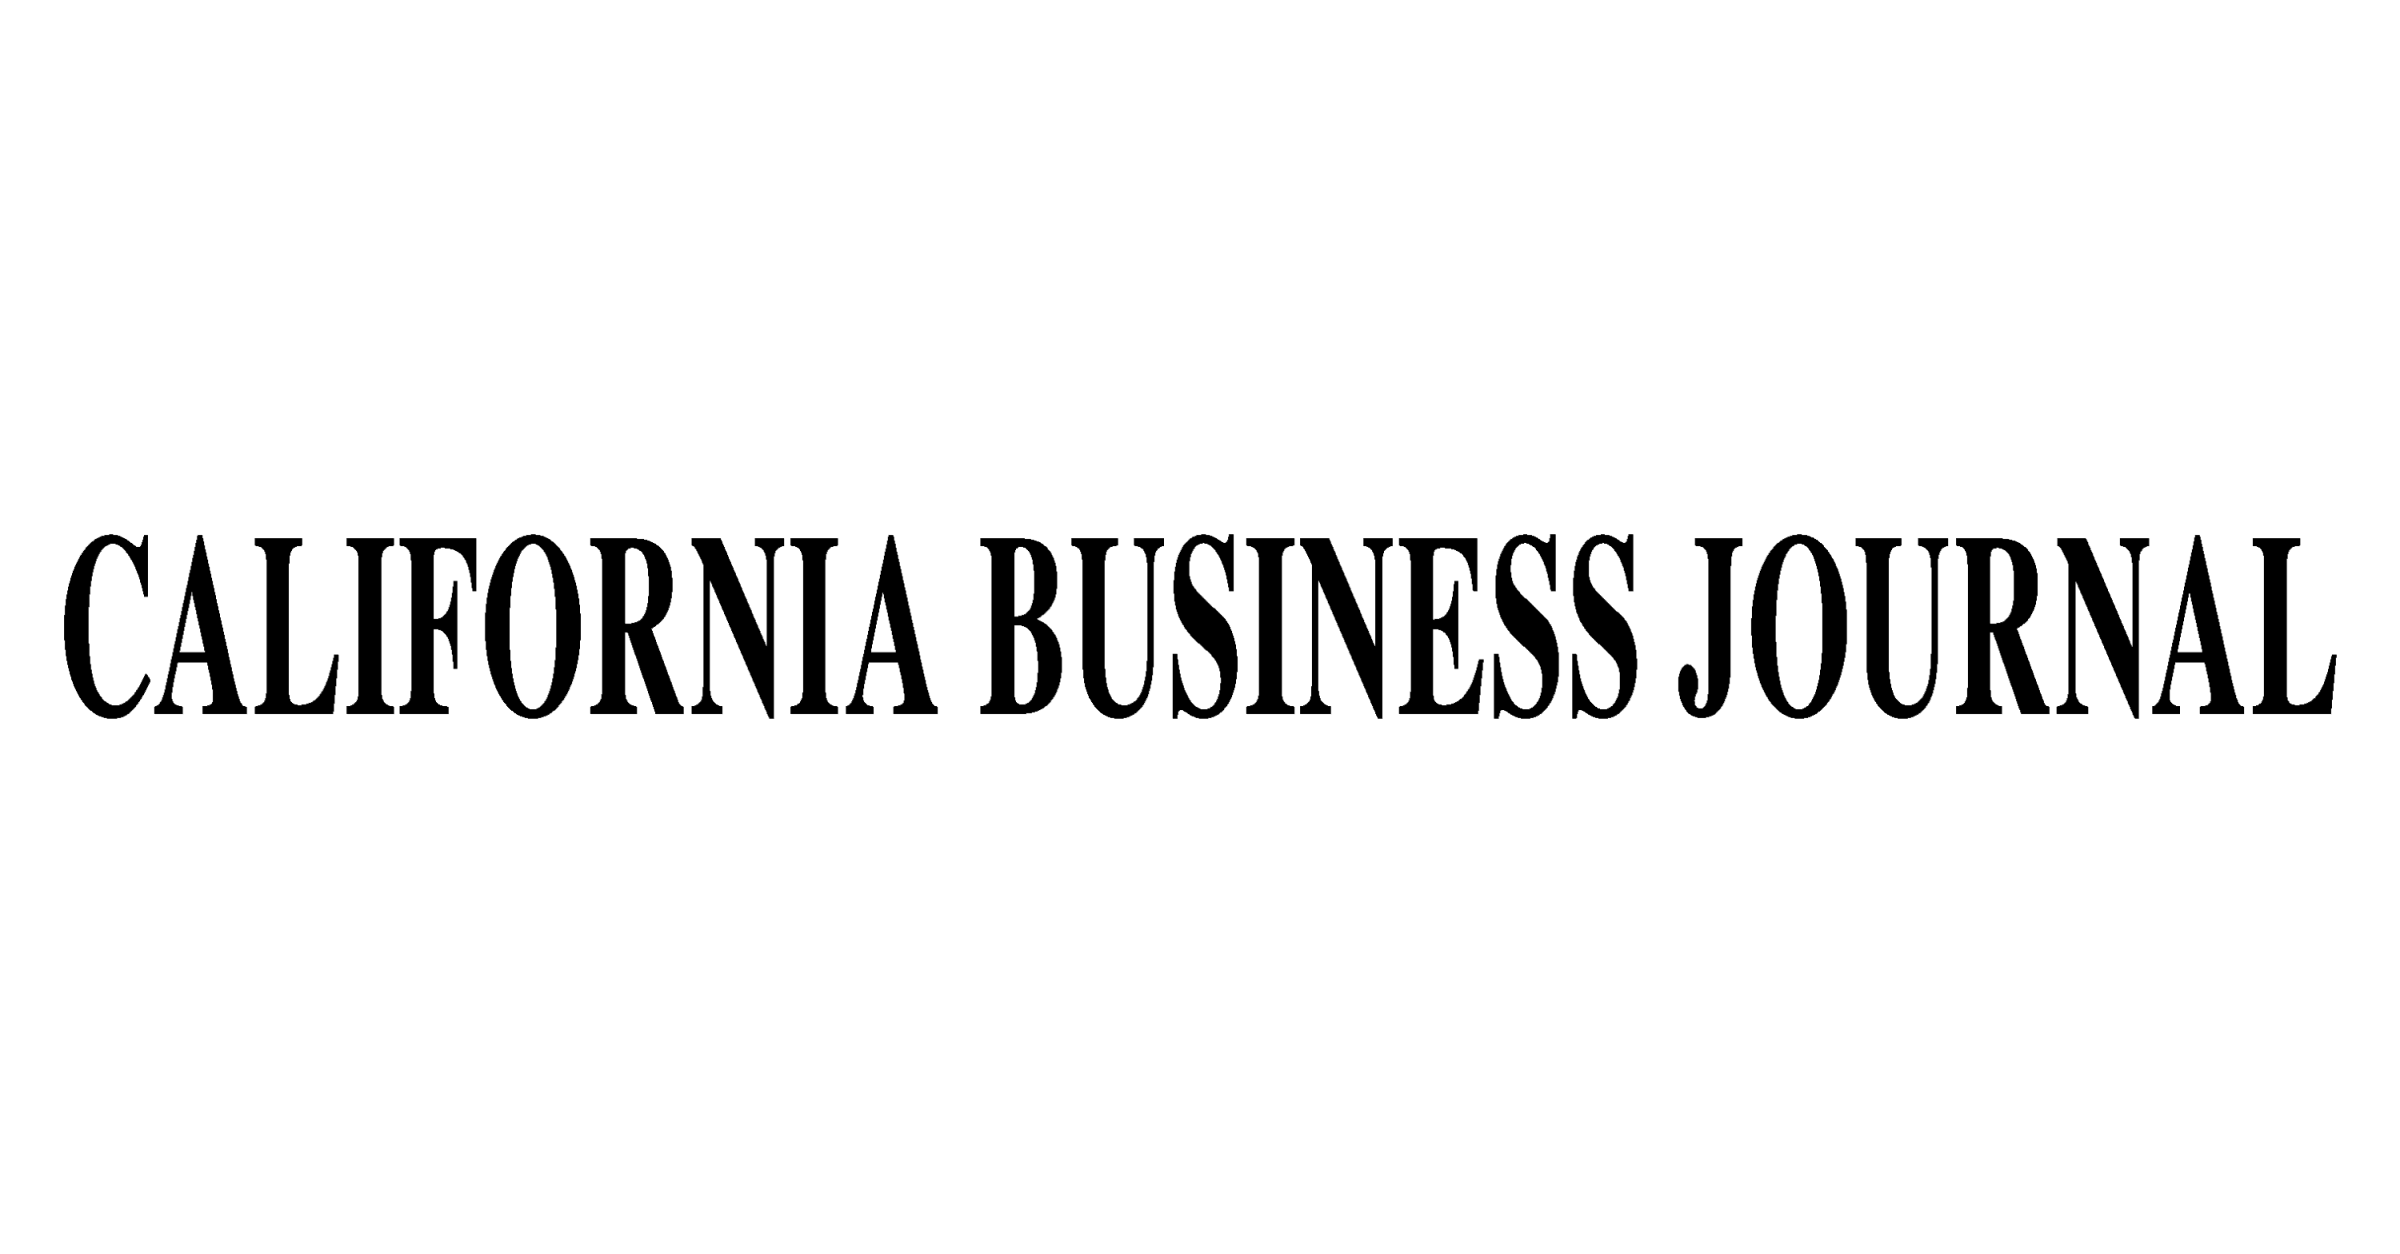 Shawn Landis provides tips on what to do when inheriting wealth in article from California Business Journal